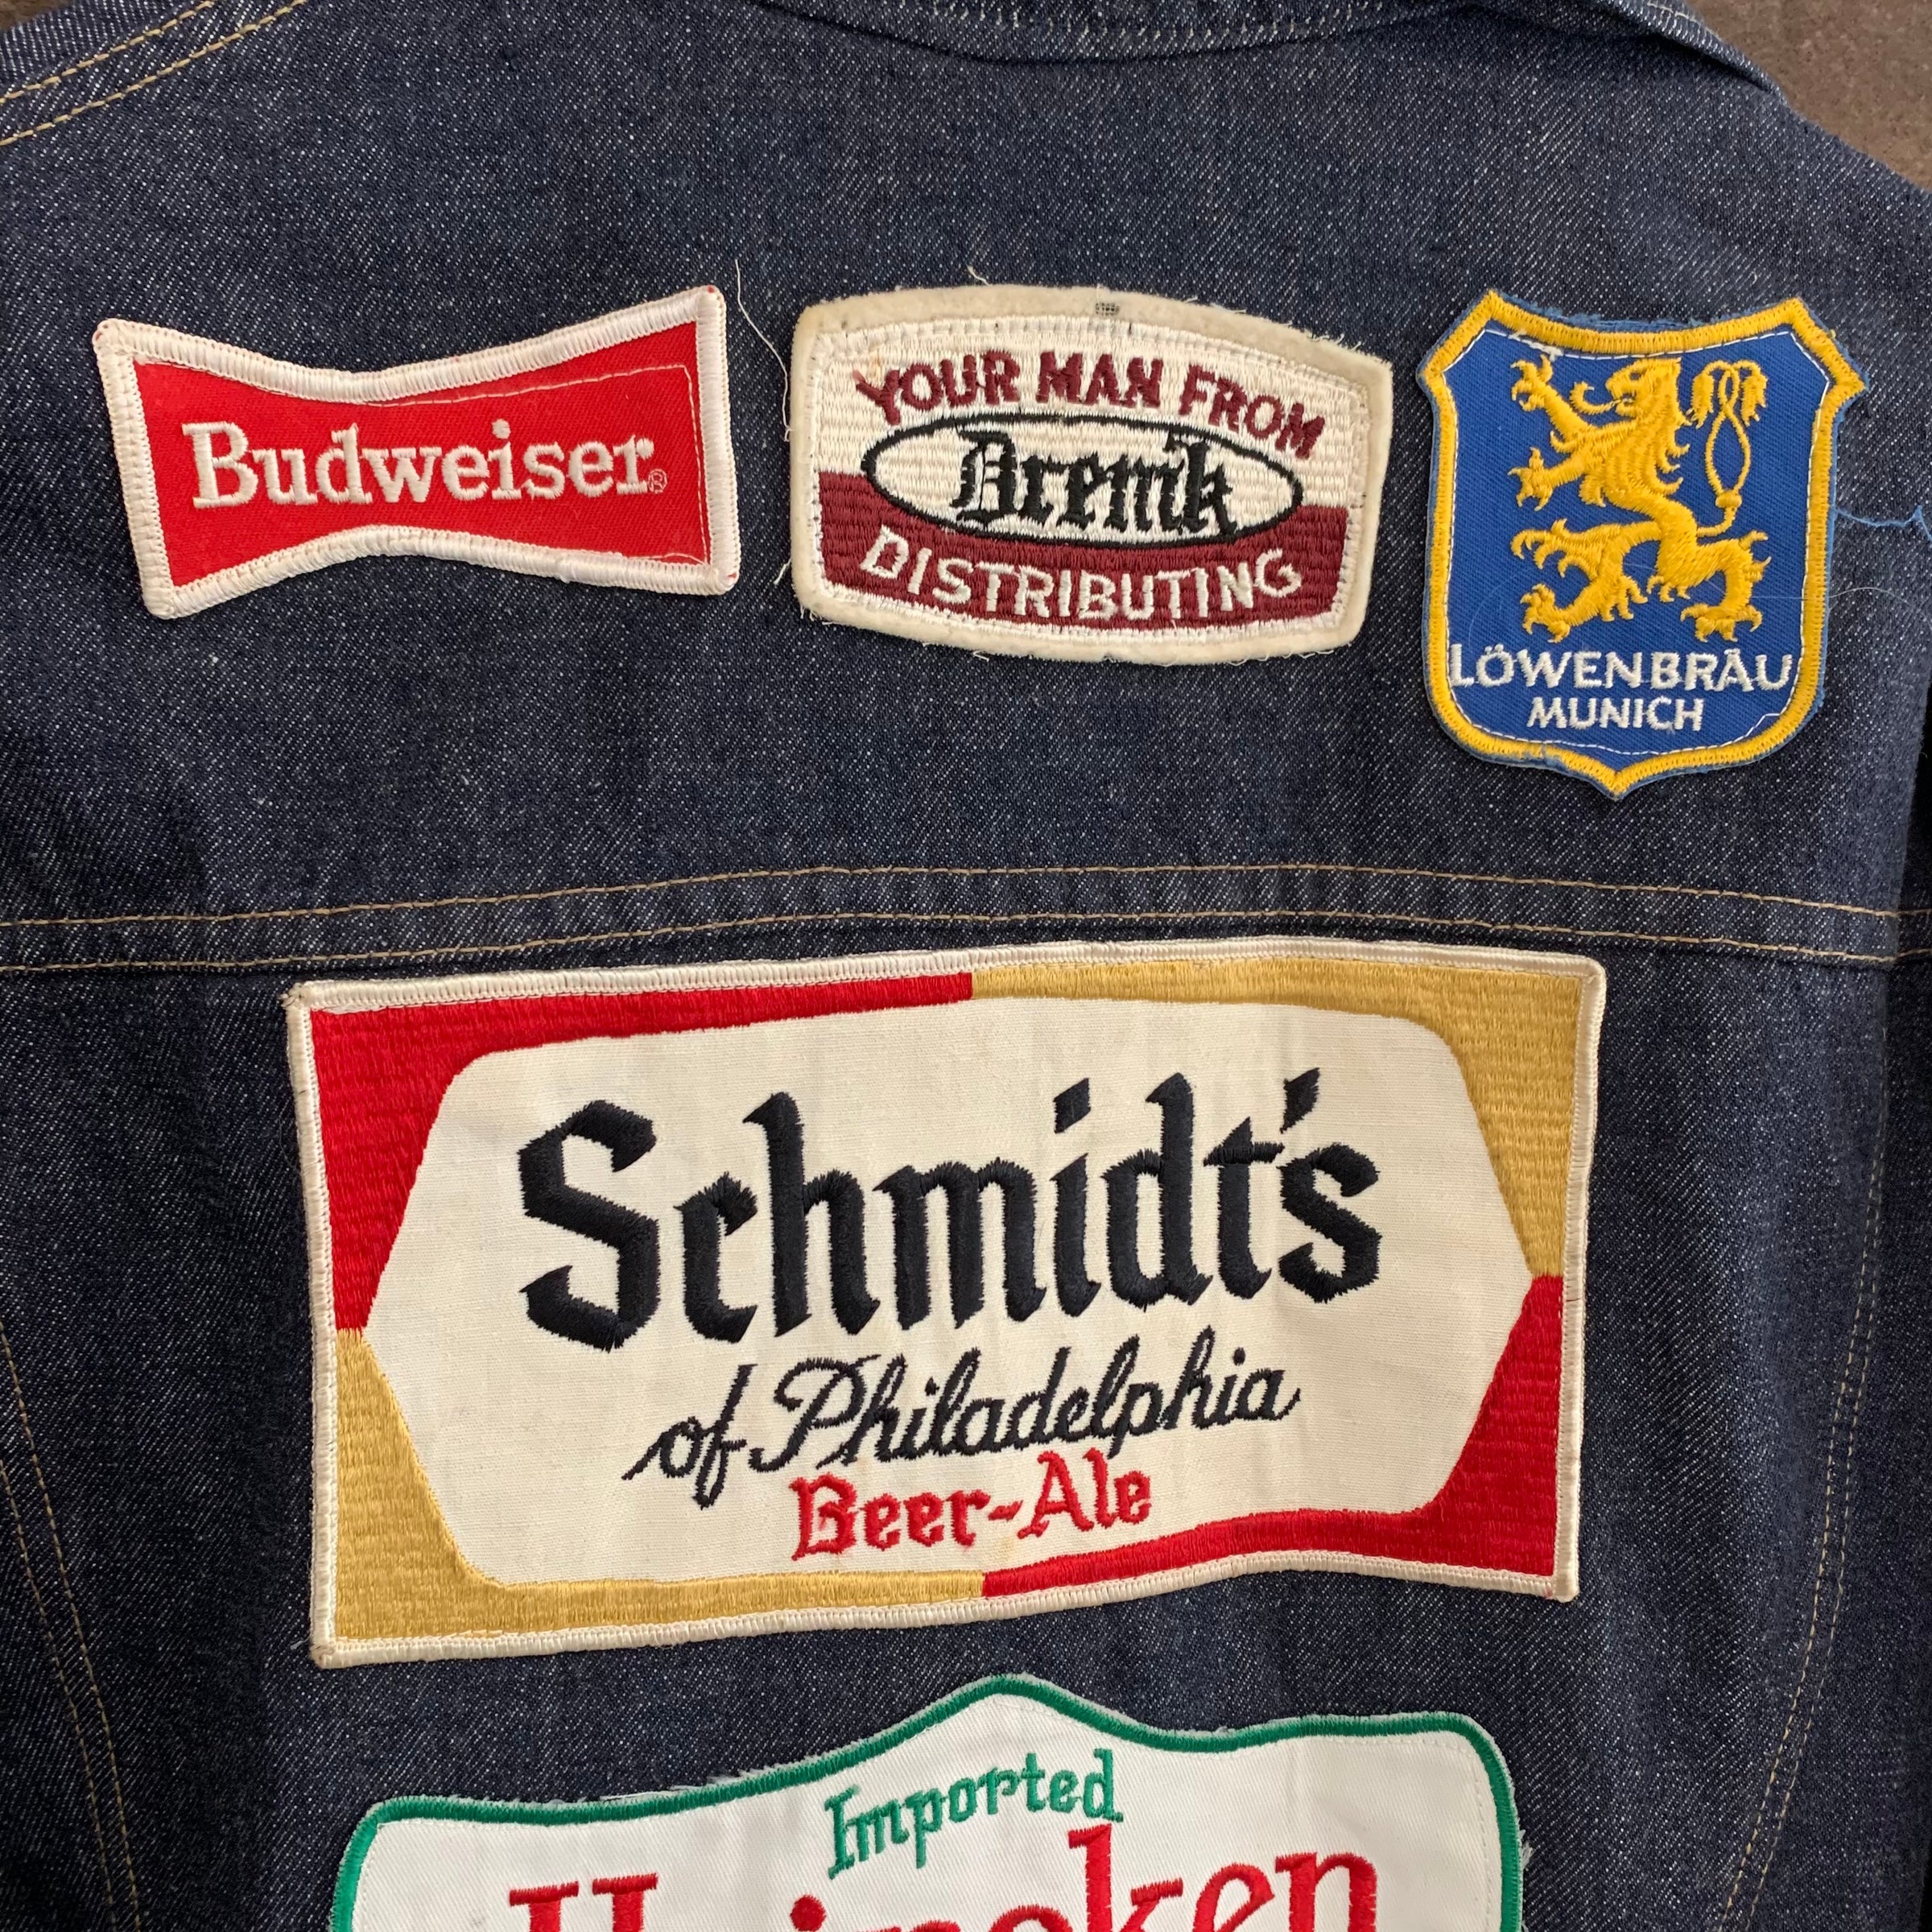 1970’s Roebuck Type 3 Jacket w/ Beer Patches L/XL